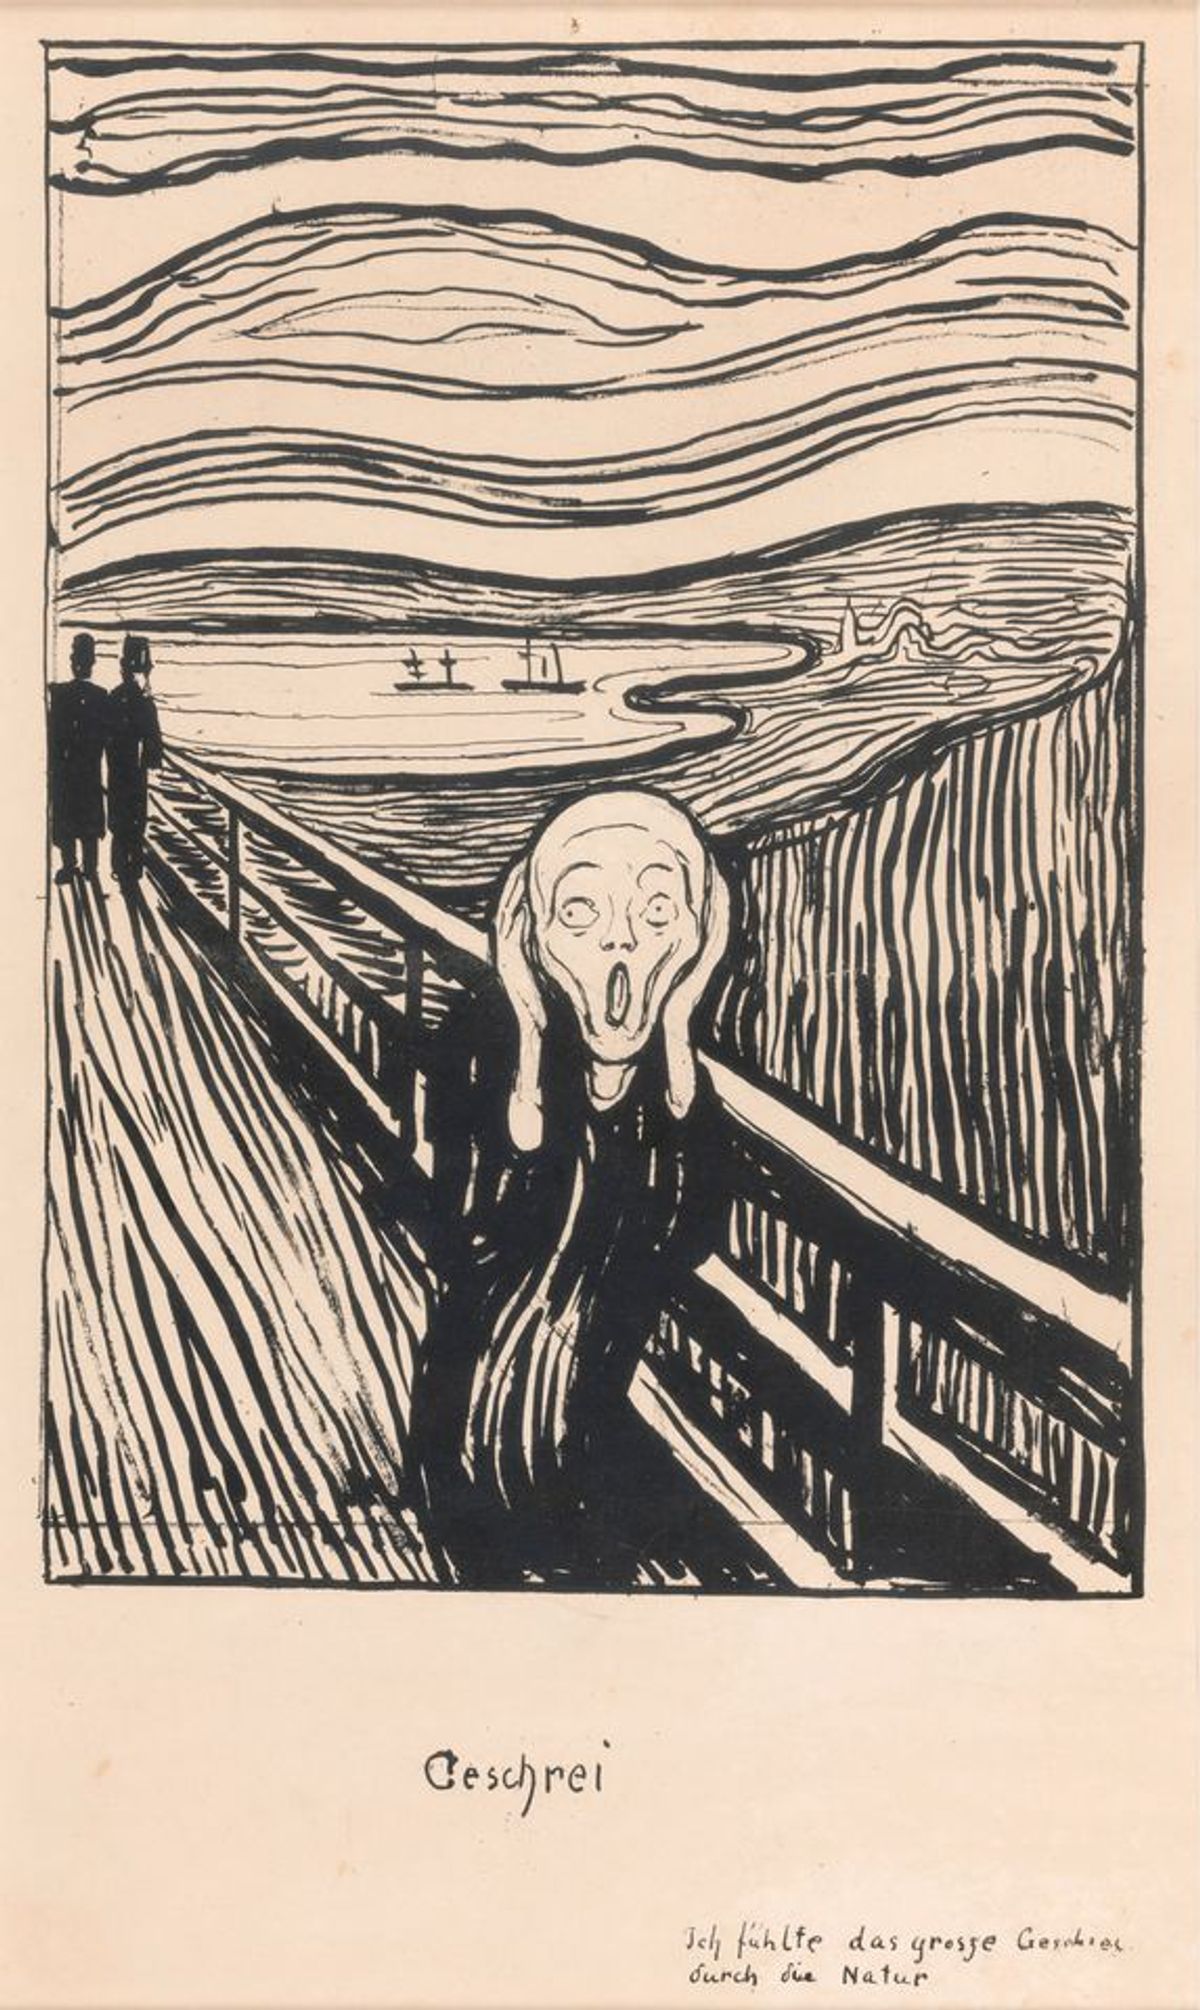 Edvard Munch, The Scream (1895) is in the show at the British Museum Photo: Thomas Widerberg